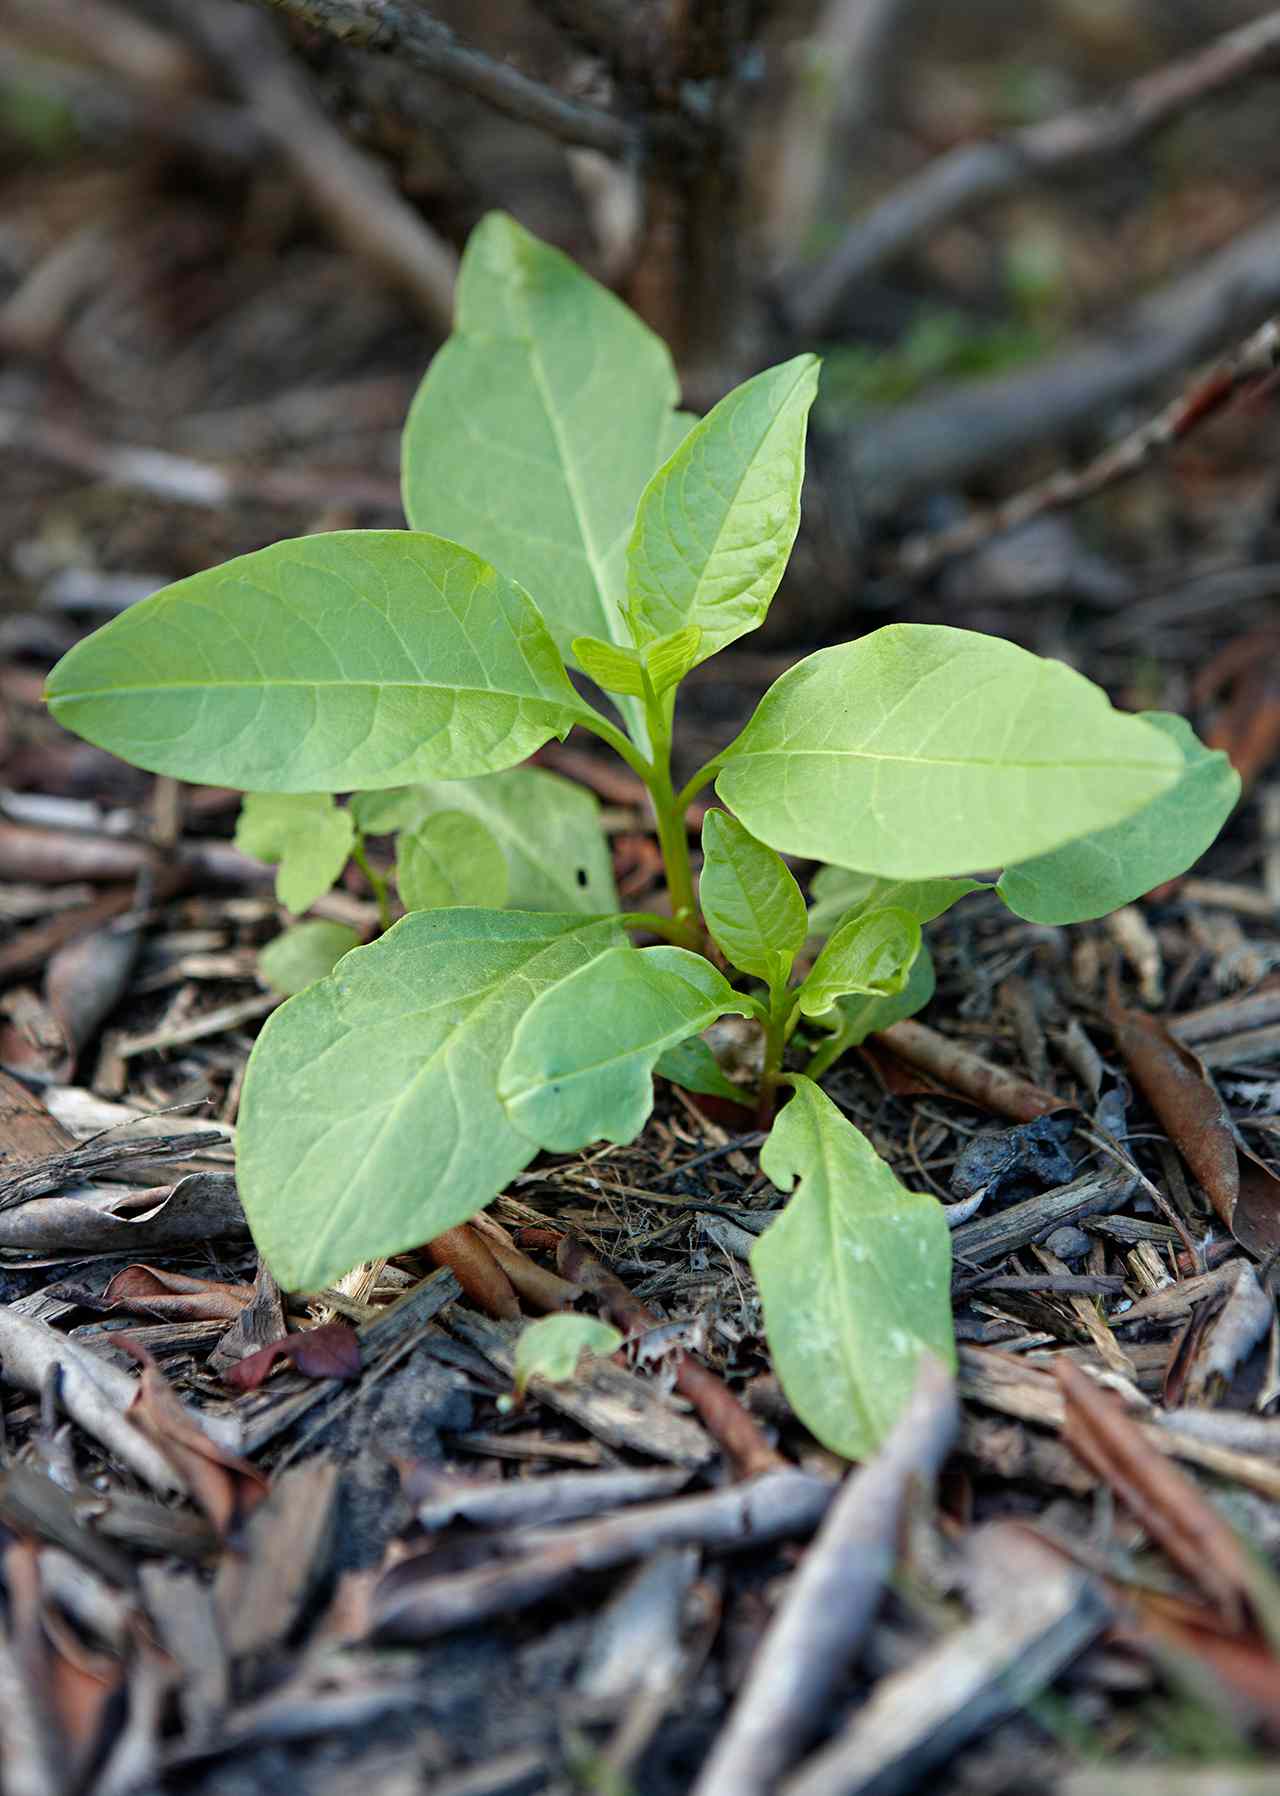 detail of pokeweed emerging from dirt